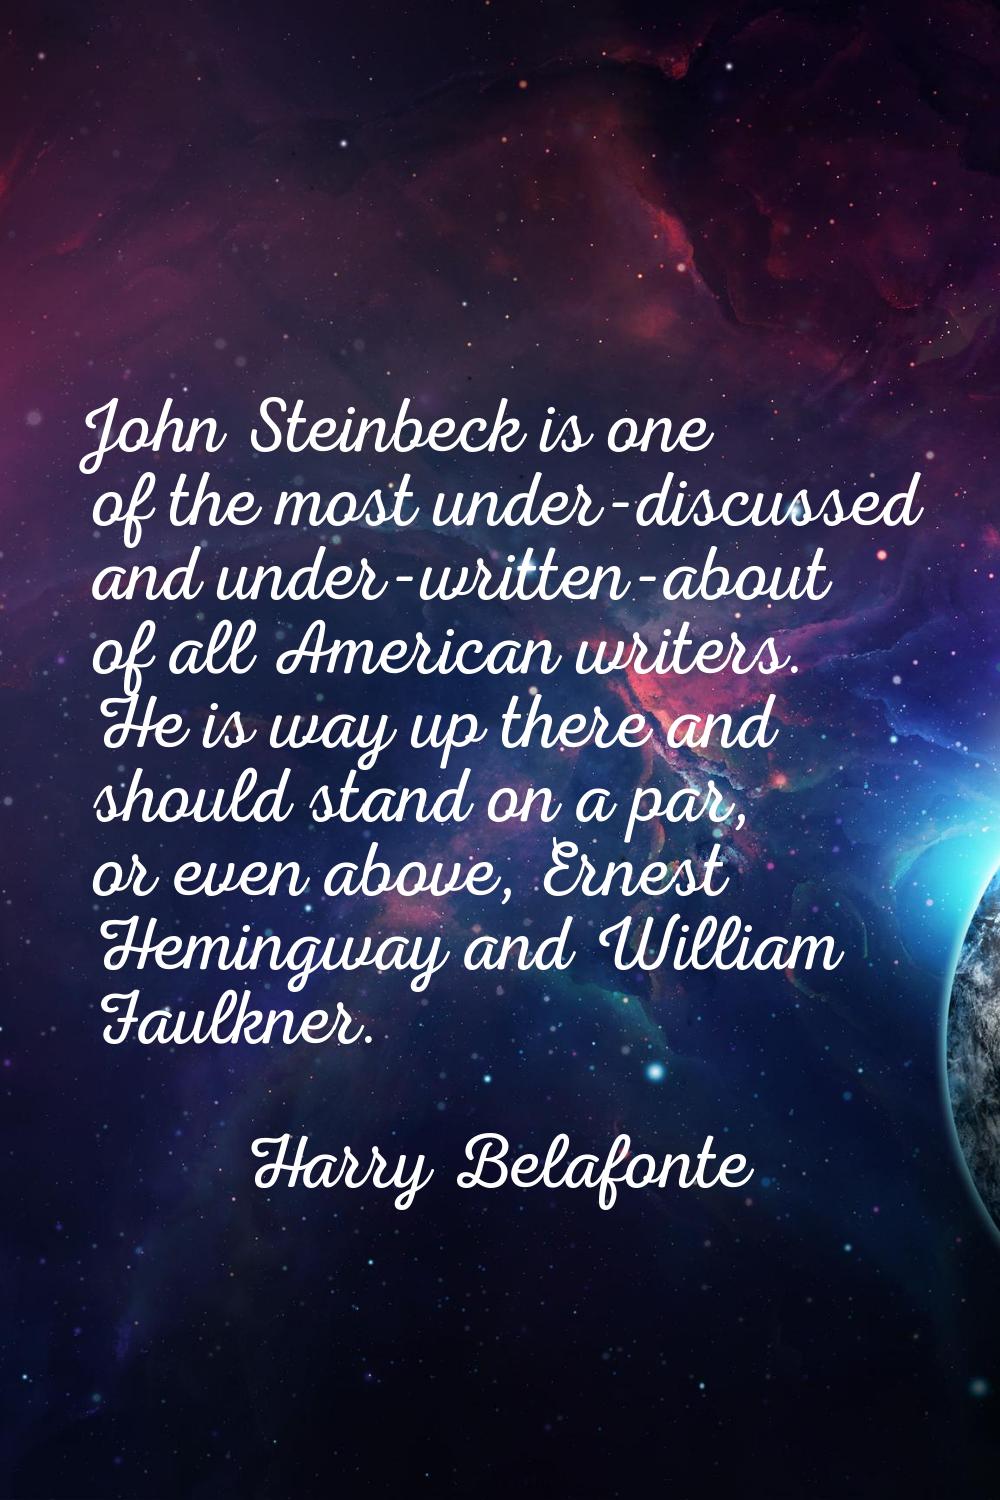 John Steinbeck is one of the most under-discussed and under-written-about of all American writers. 